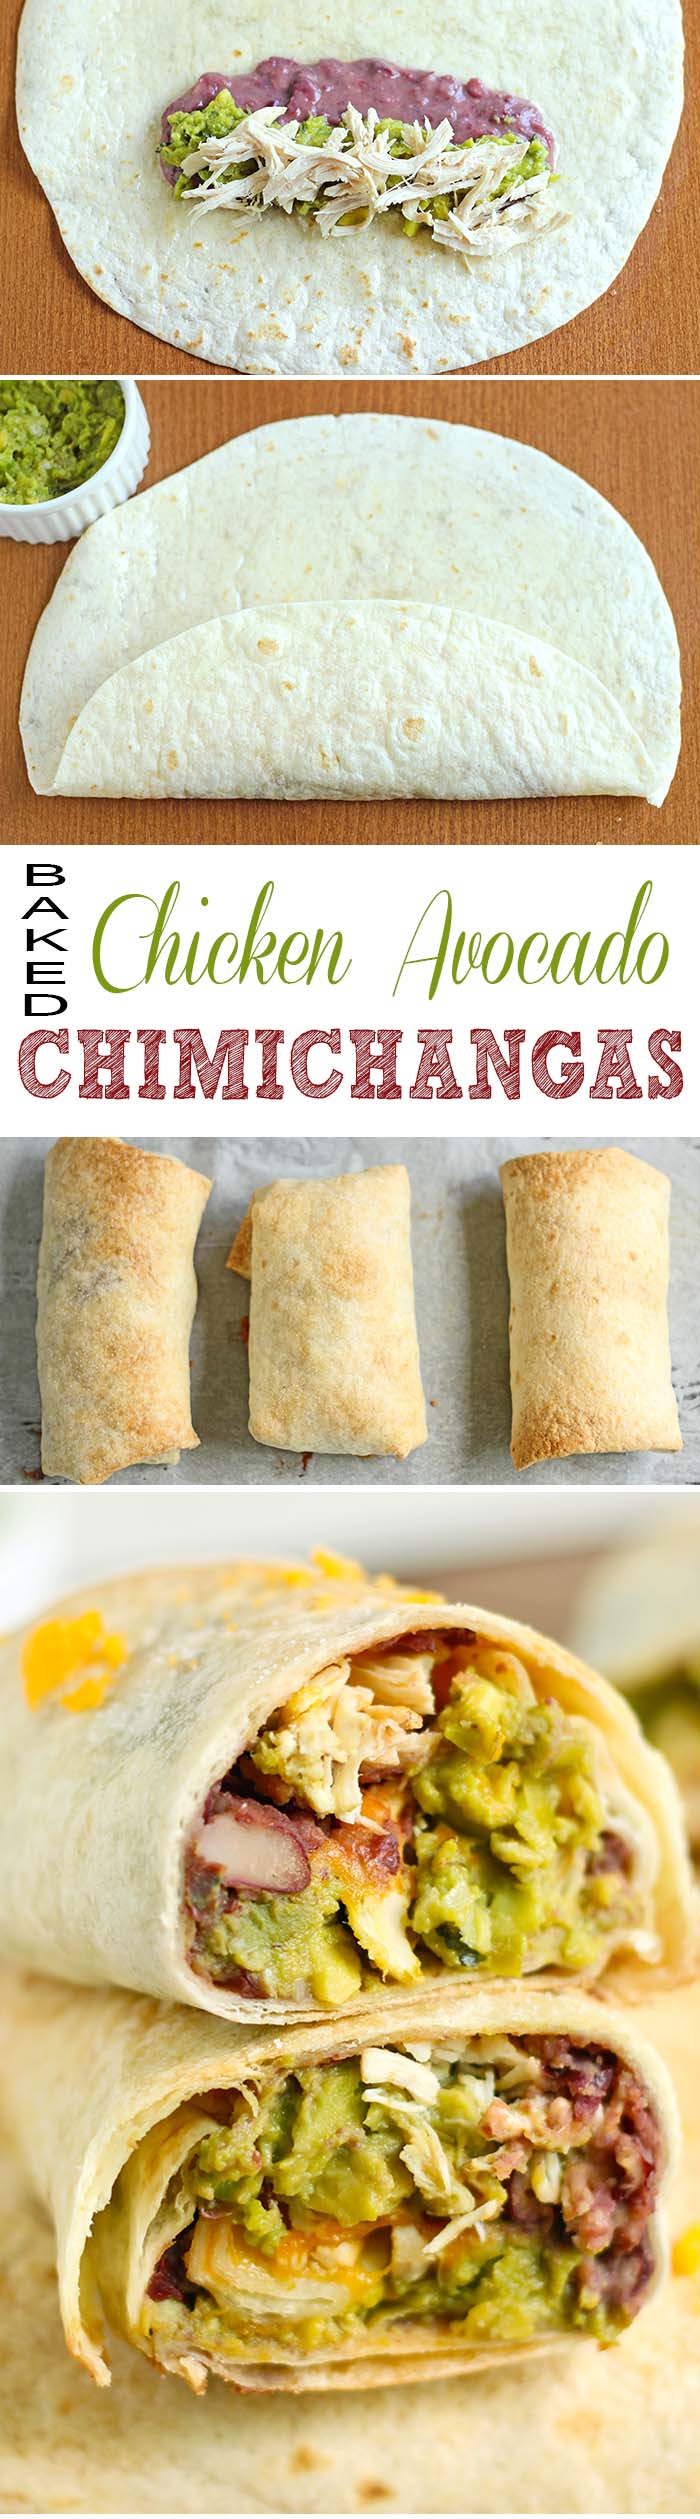 Baked Chicken Avocado Chimichangas will gather the family, make you enjoy your meal more and create good mood - and what else could be more valuable?